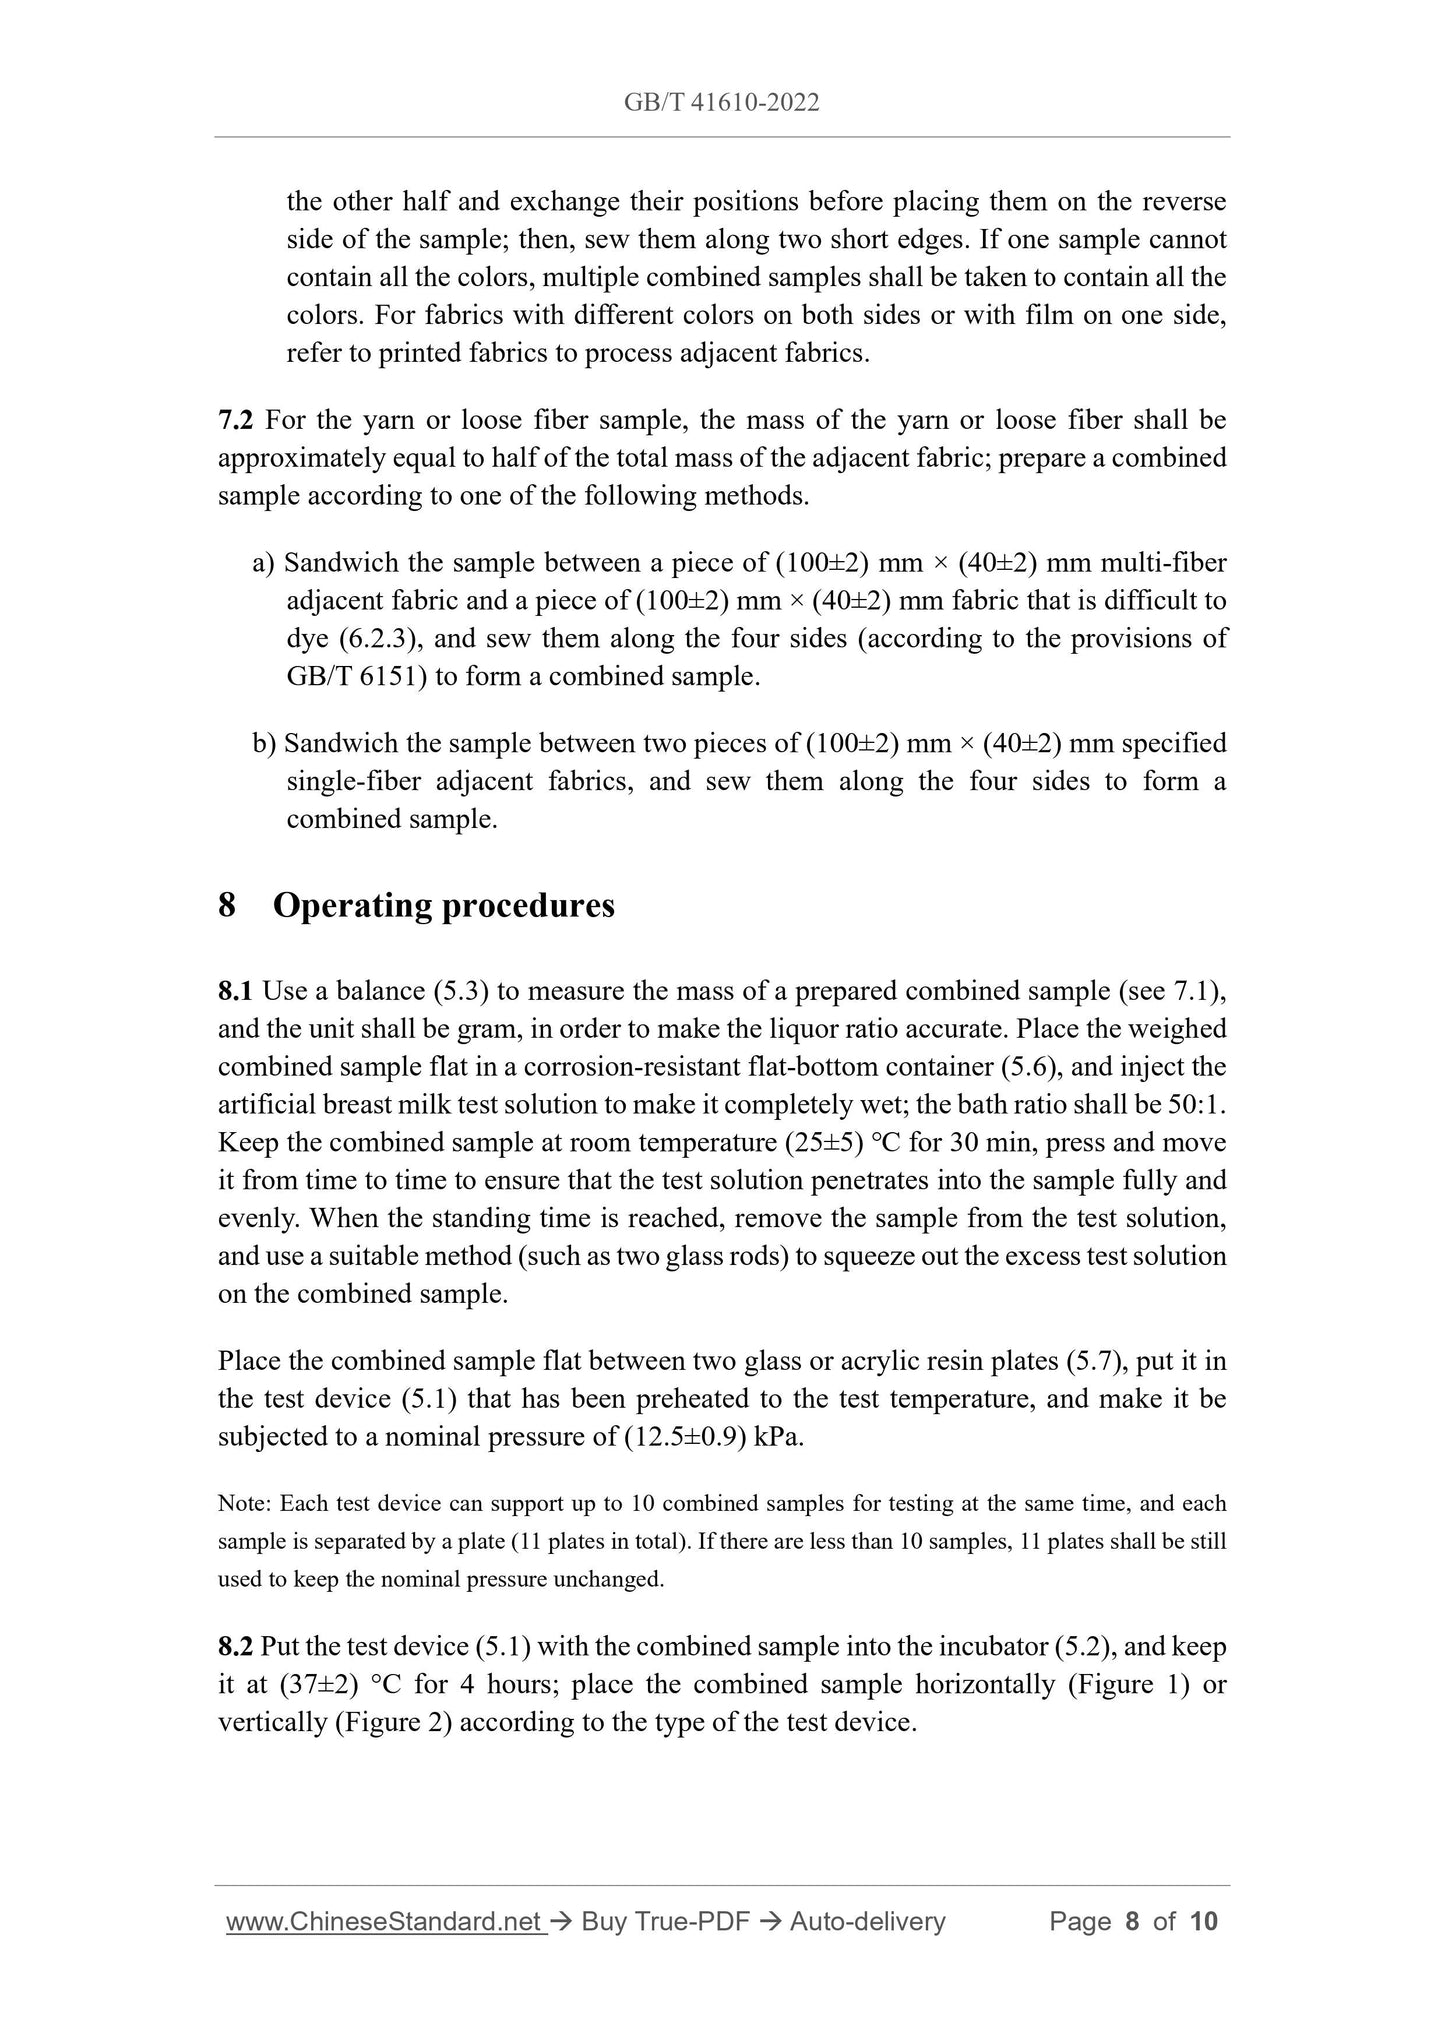 GB/T 41610-2022 Page 5